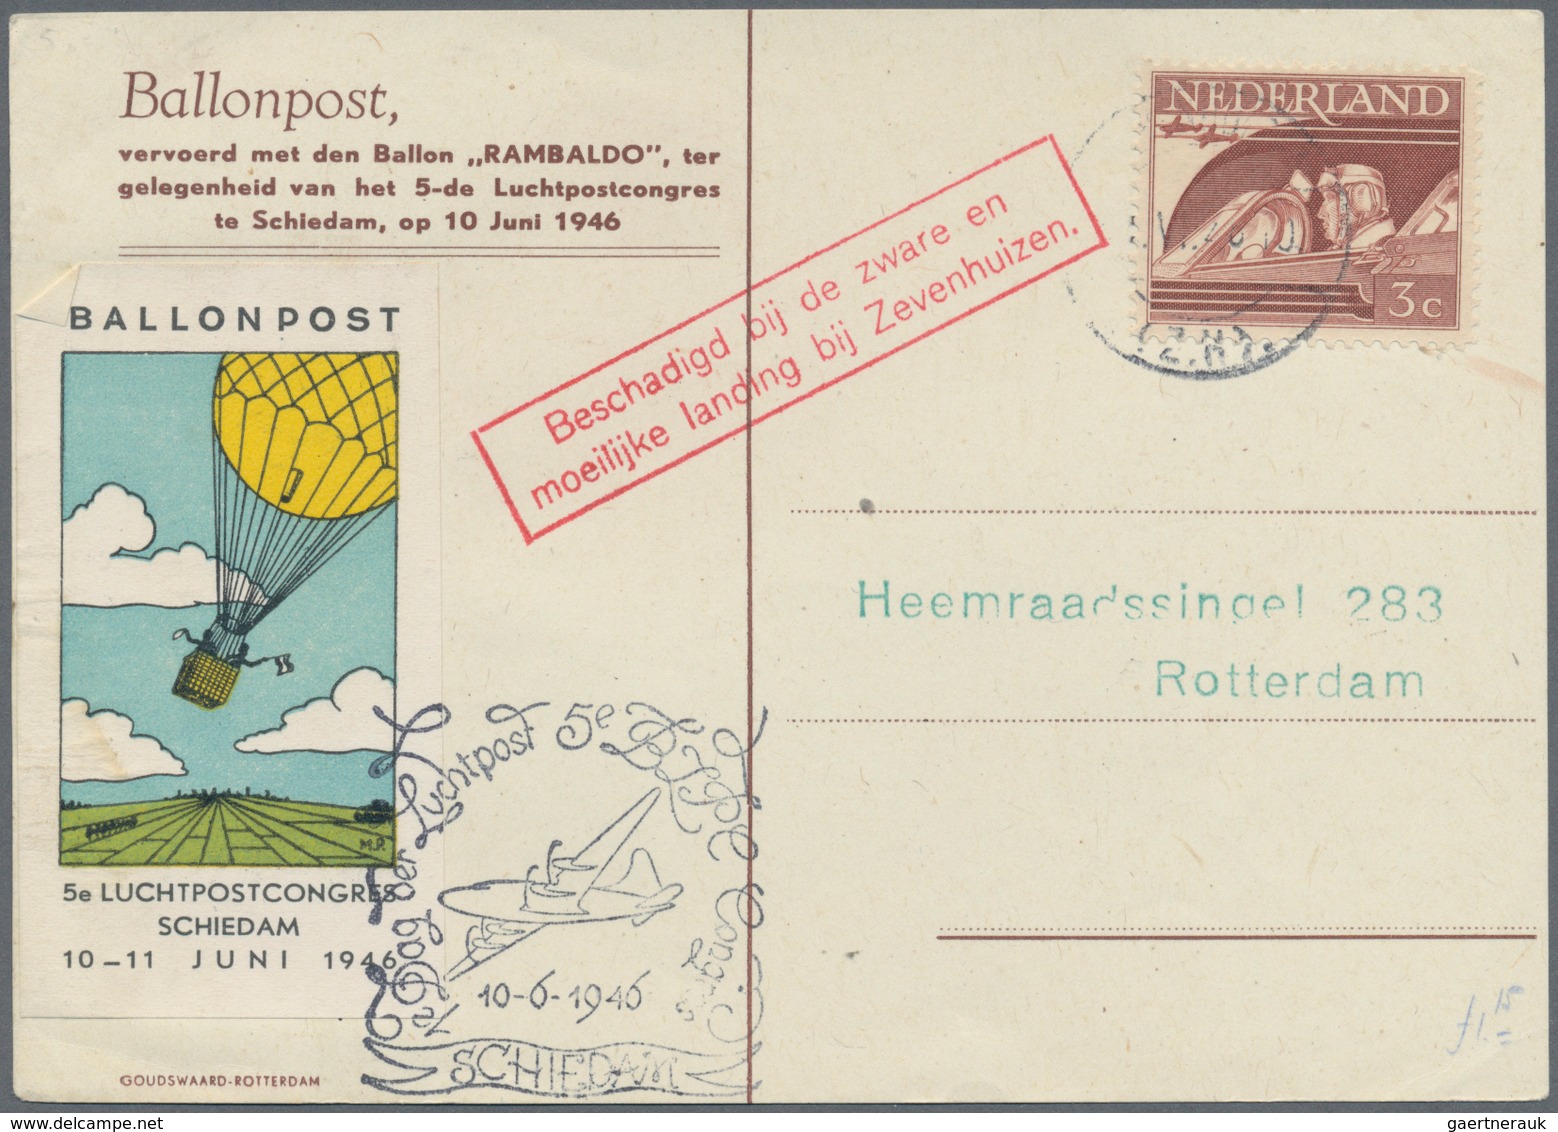 Ballonpost: 1924/1997, sophisticated holding of several hundred balloon covers/cards (mainly flown m